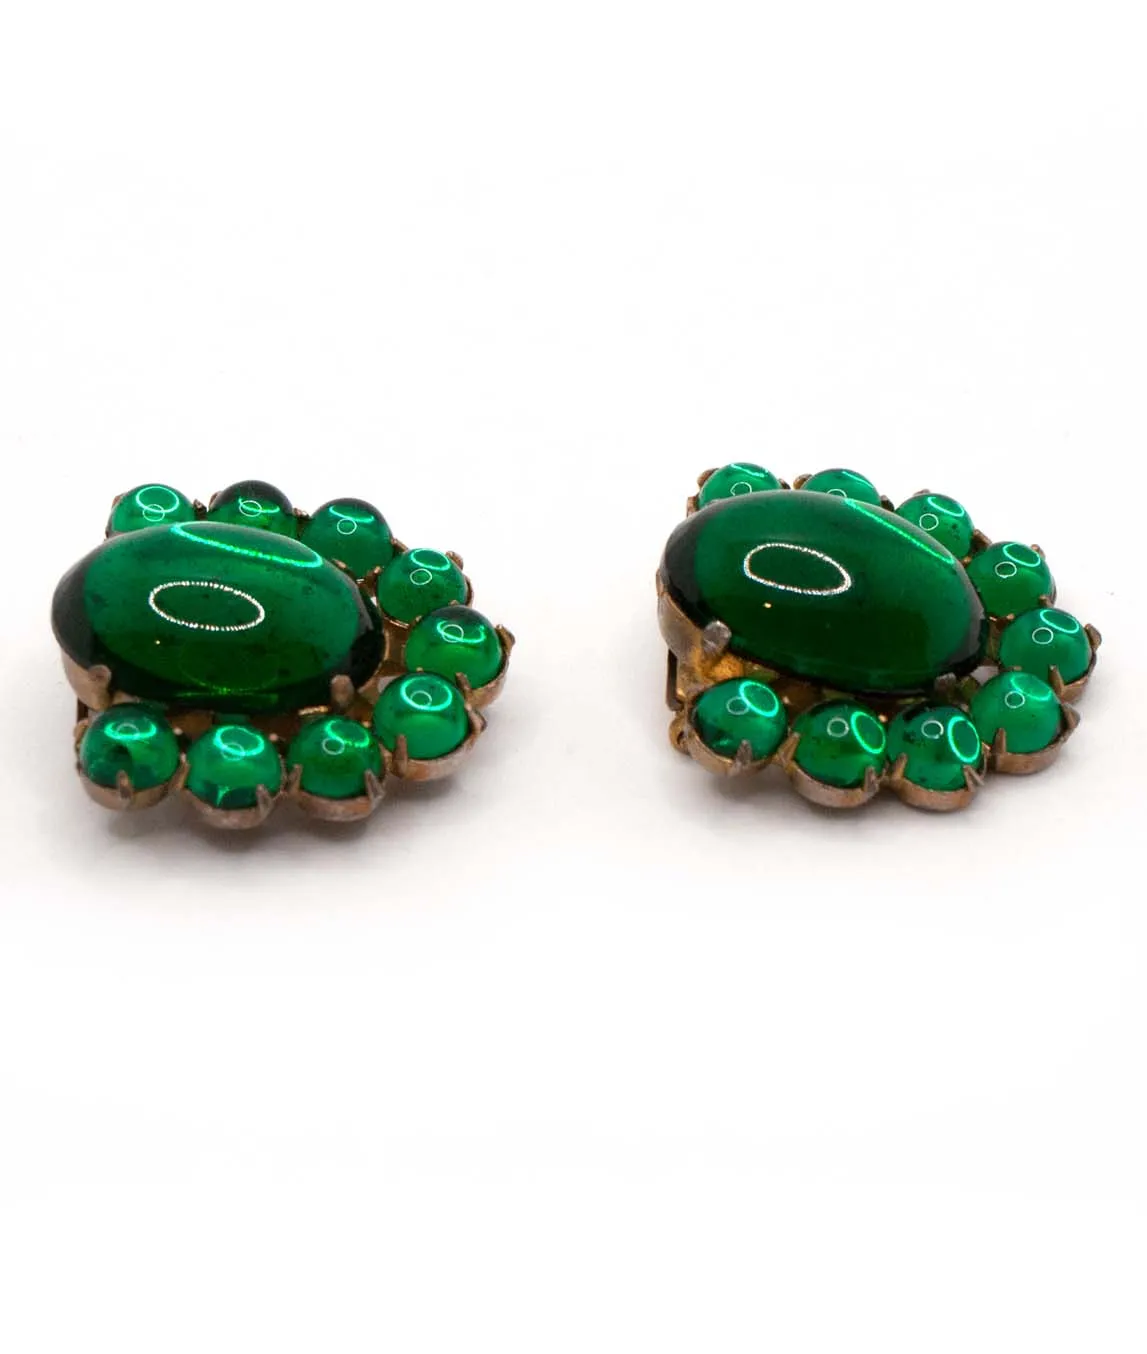 Pair of green glass cabochon dress clips with round glass stones as perimeter - side view